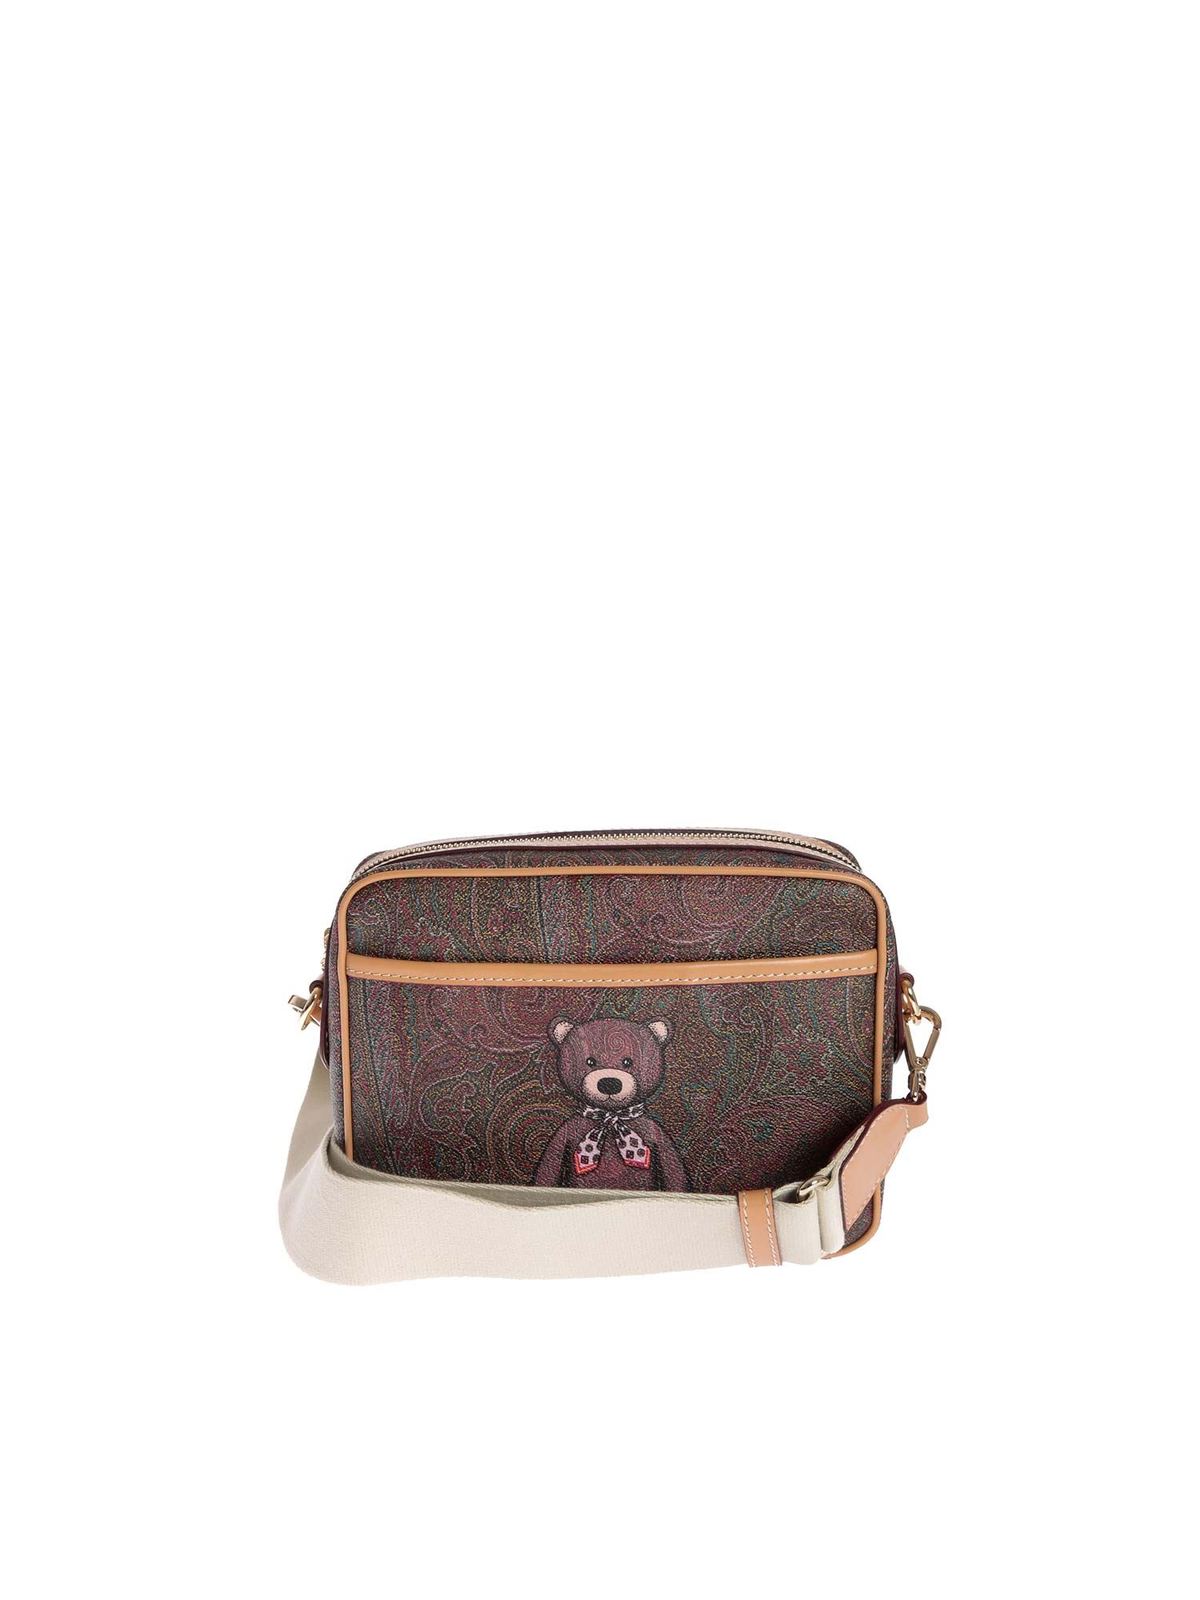 ETRO TOYS PAISLEY BAG IN BROWN